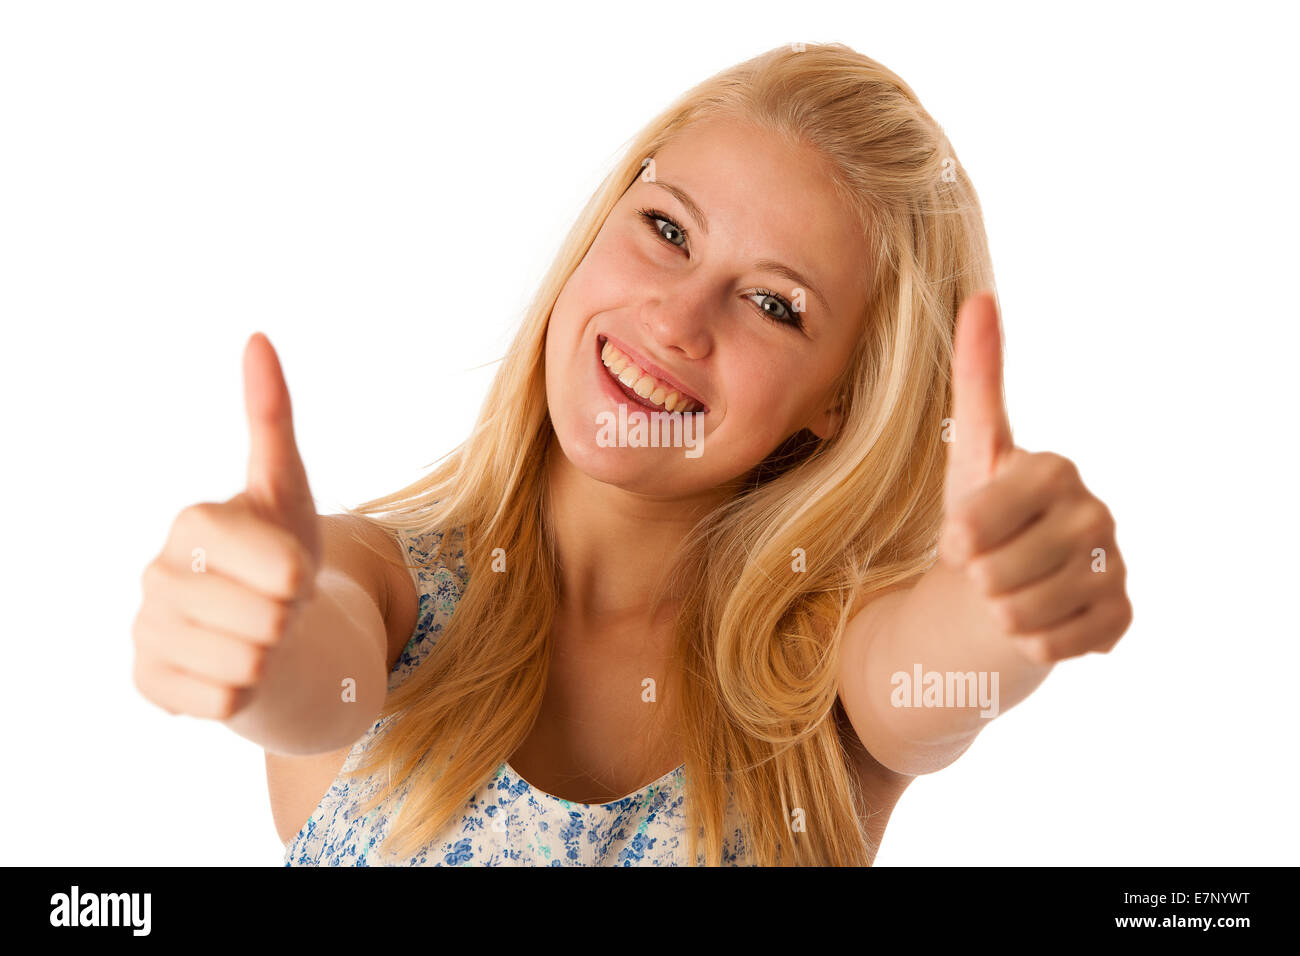 Young business woman with blonde hair and blue eyes gesturing success showing thumb up isolated over white Stock Photo